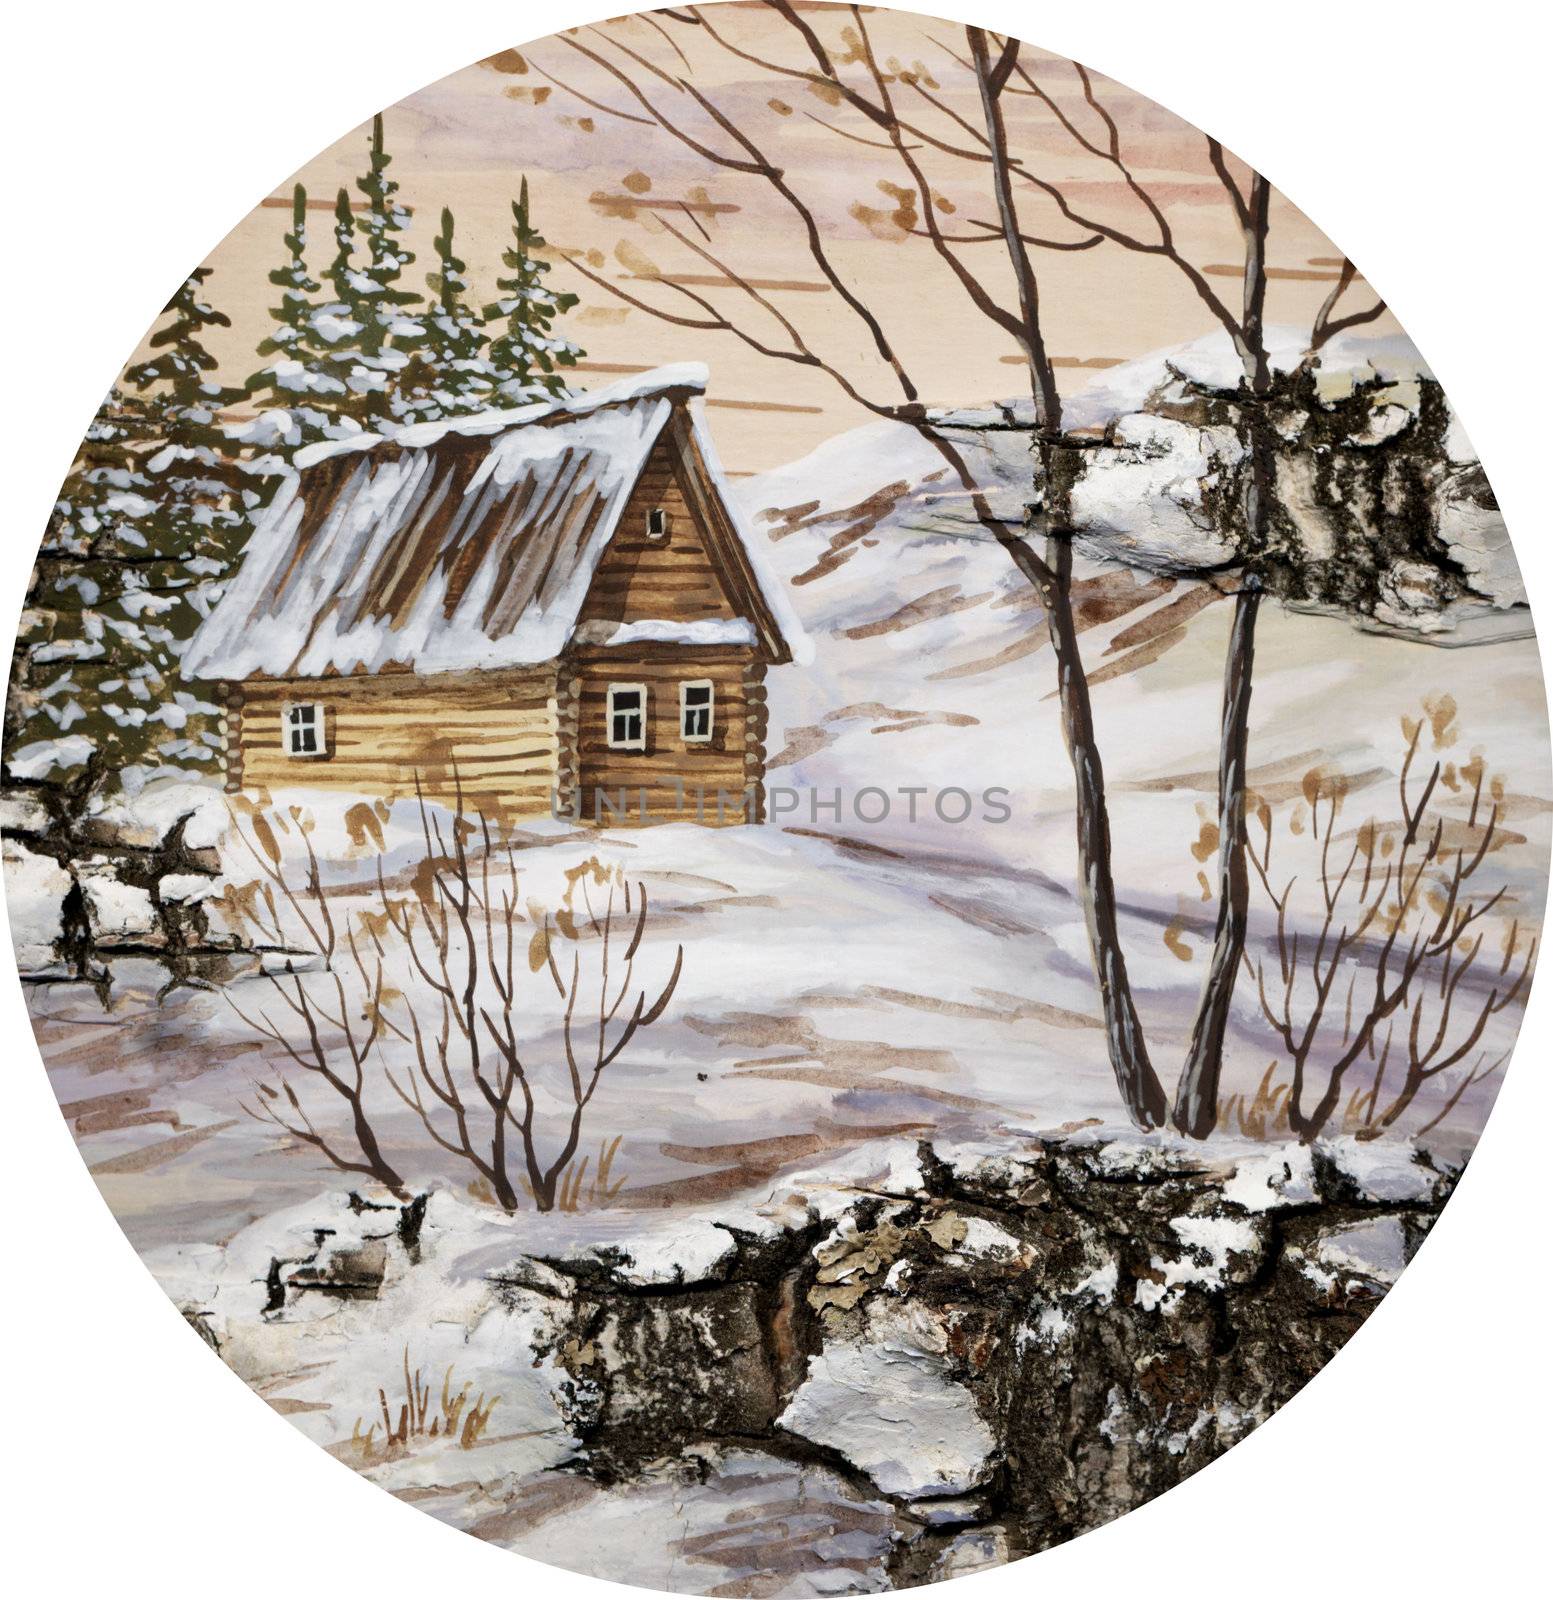 Drawing distemper on a birch bark: small house in wood